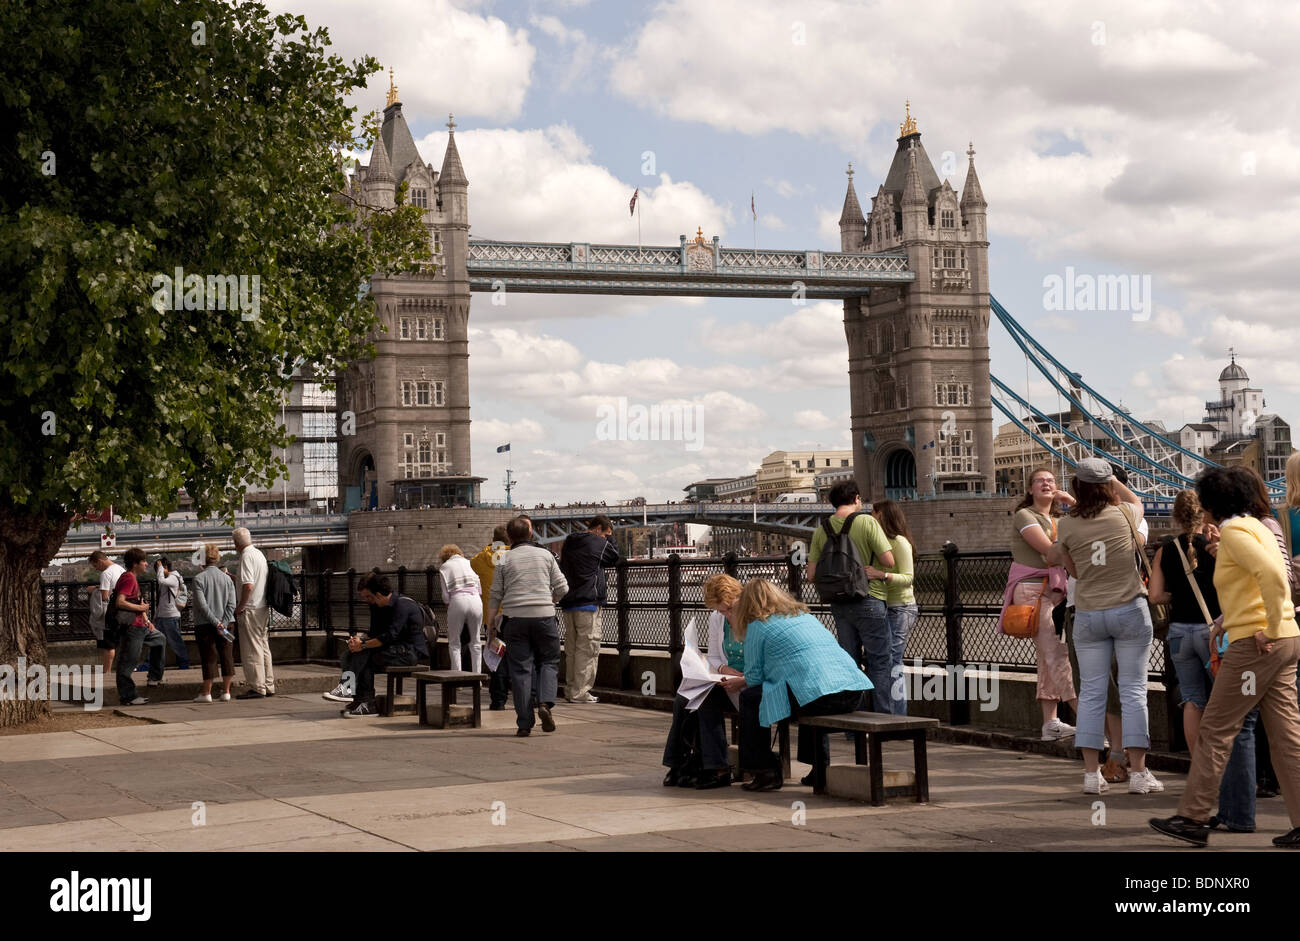 Tourists and visitors enjoying the famous landmark Tower Bridge crossing the Thames river in London, UK Stock Photo